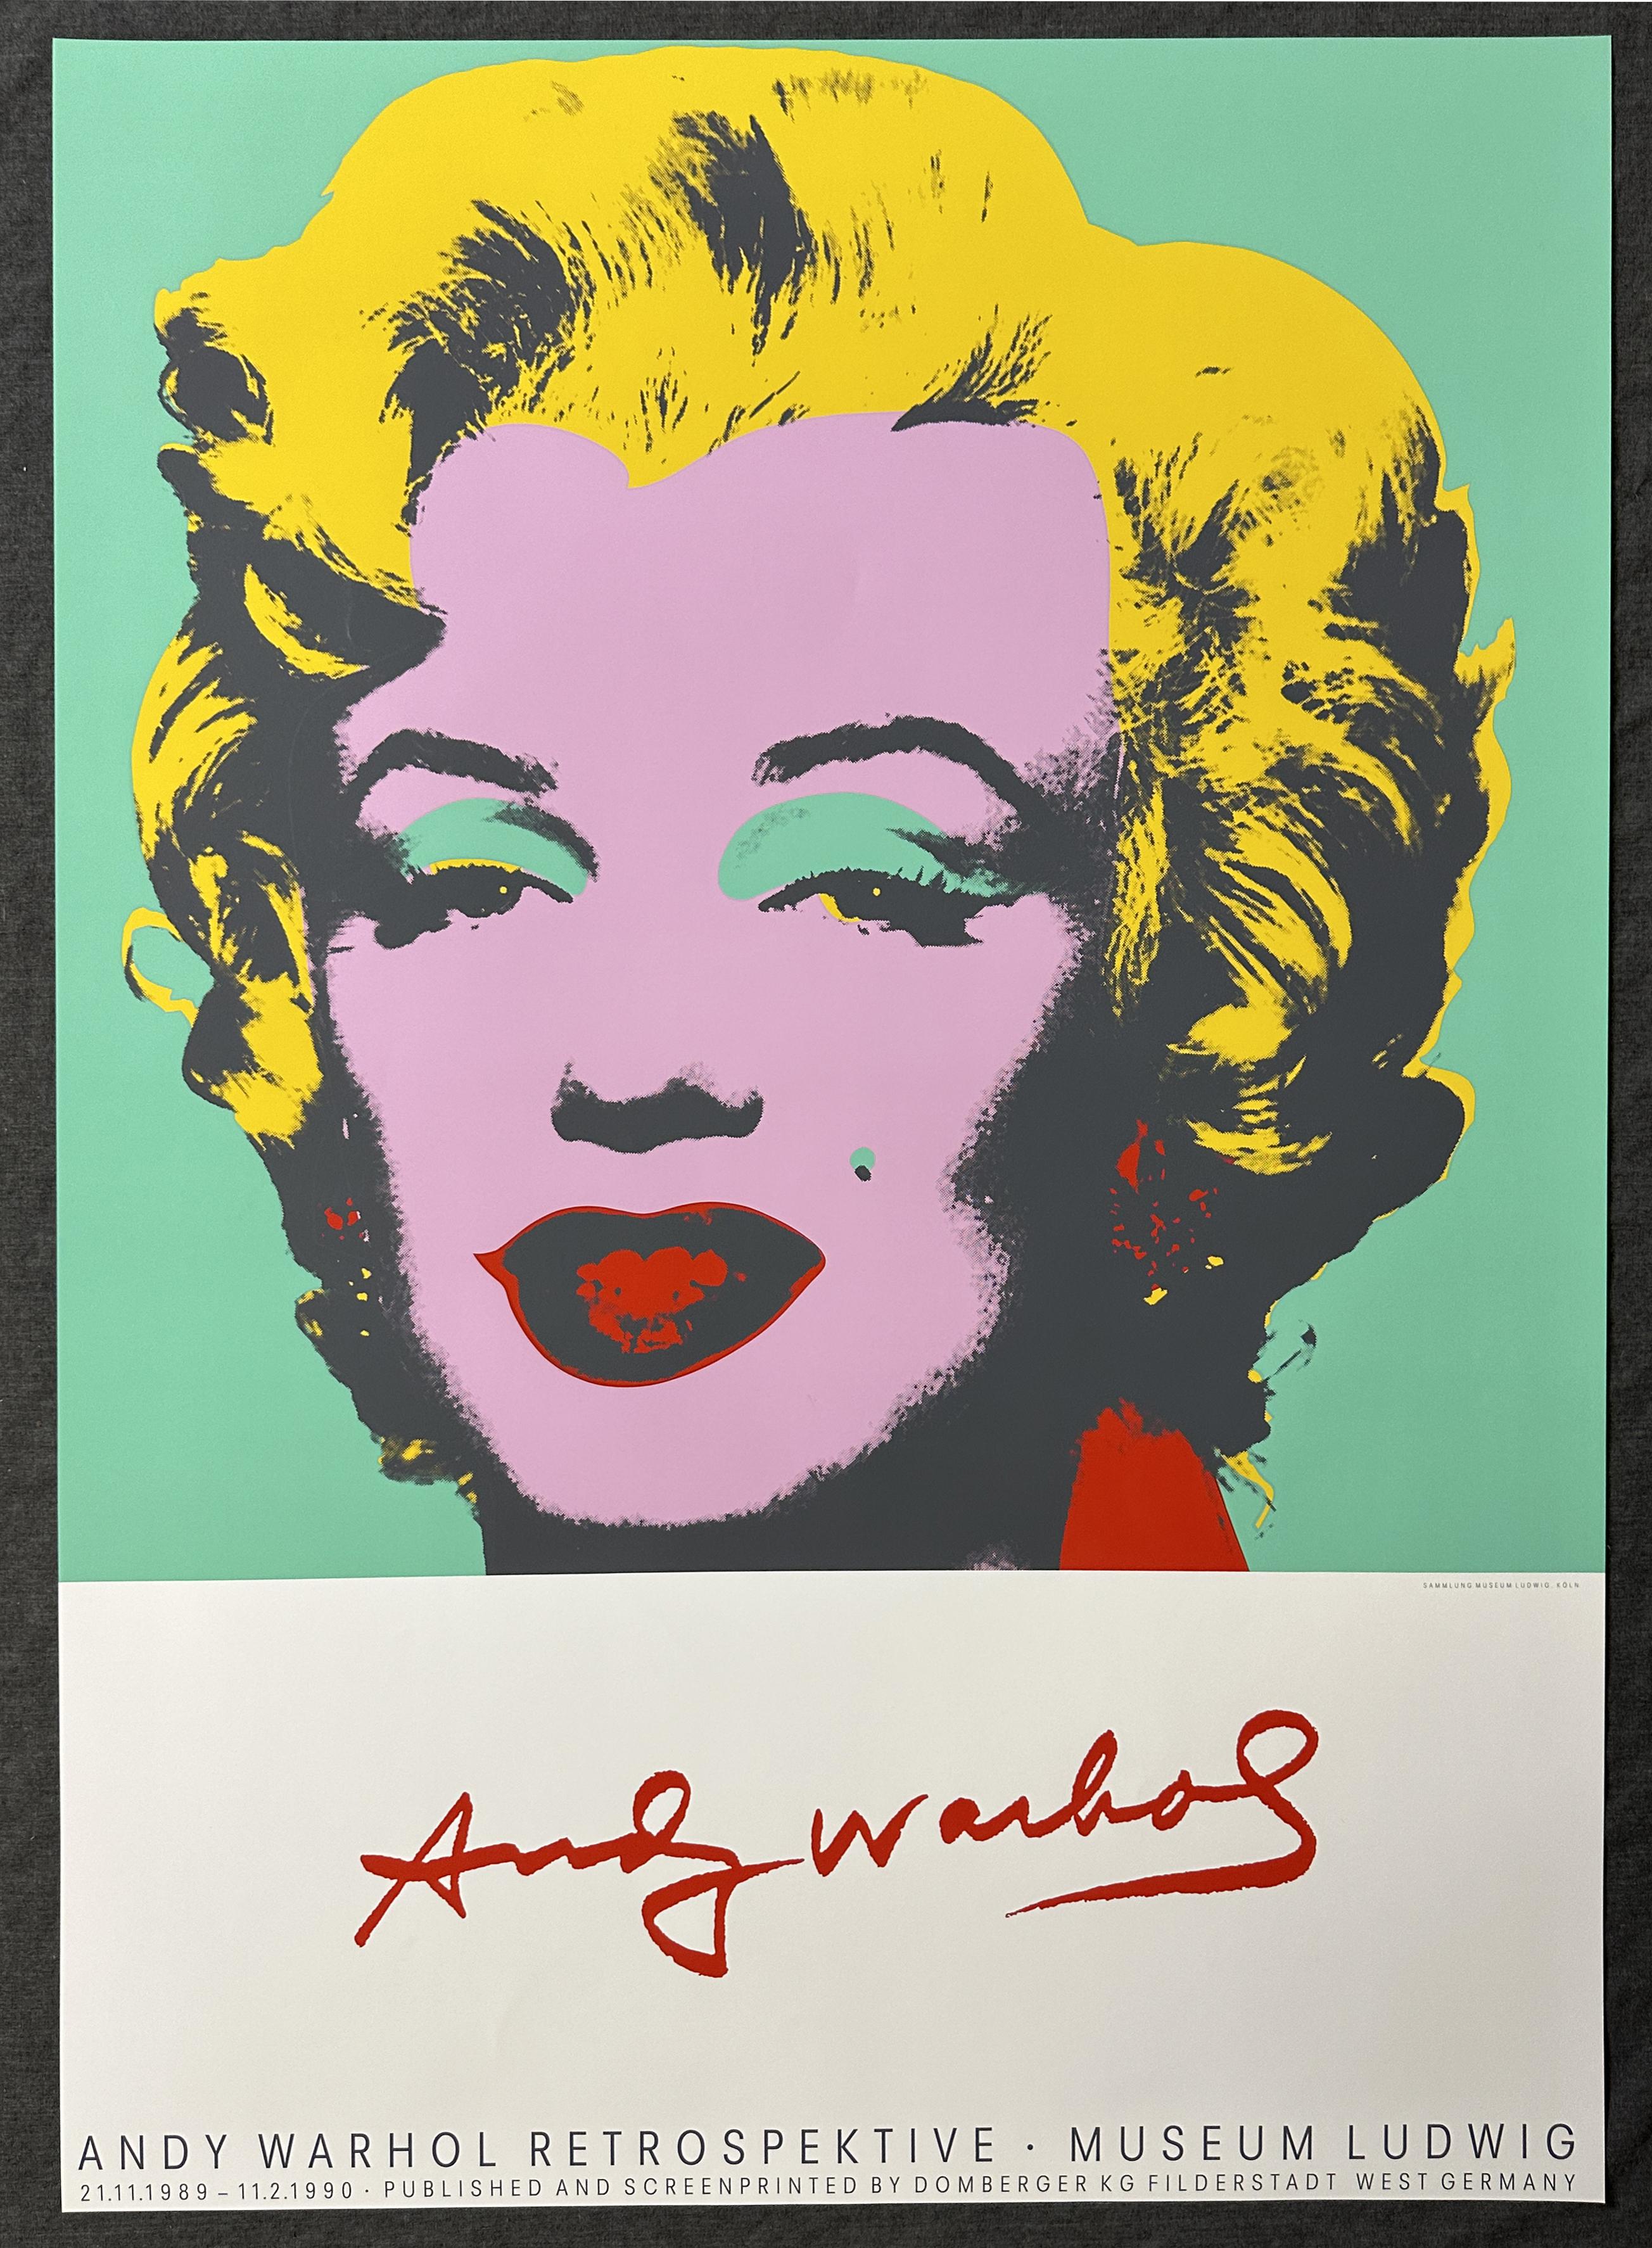 Andy Warhol retrospective exhibition at the Ludwig Museum in Cologne / Koln 
21 November 1989-11 February 1990 
Andy Warhol Retrospektive Museum Ludwig (established 1976). 
Published and screen printed by Domberger Kg Filderstadt, West Germany. 